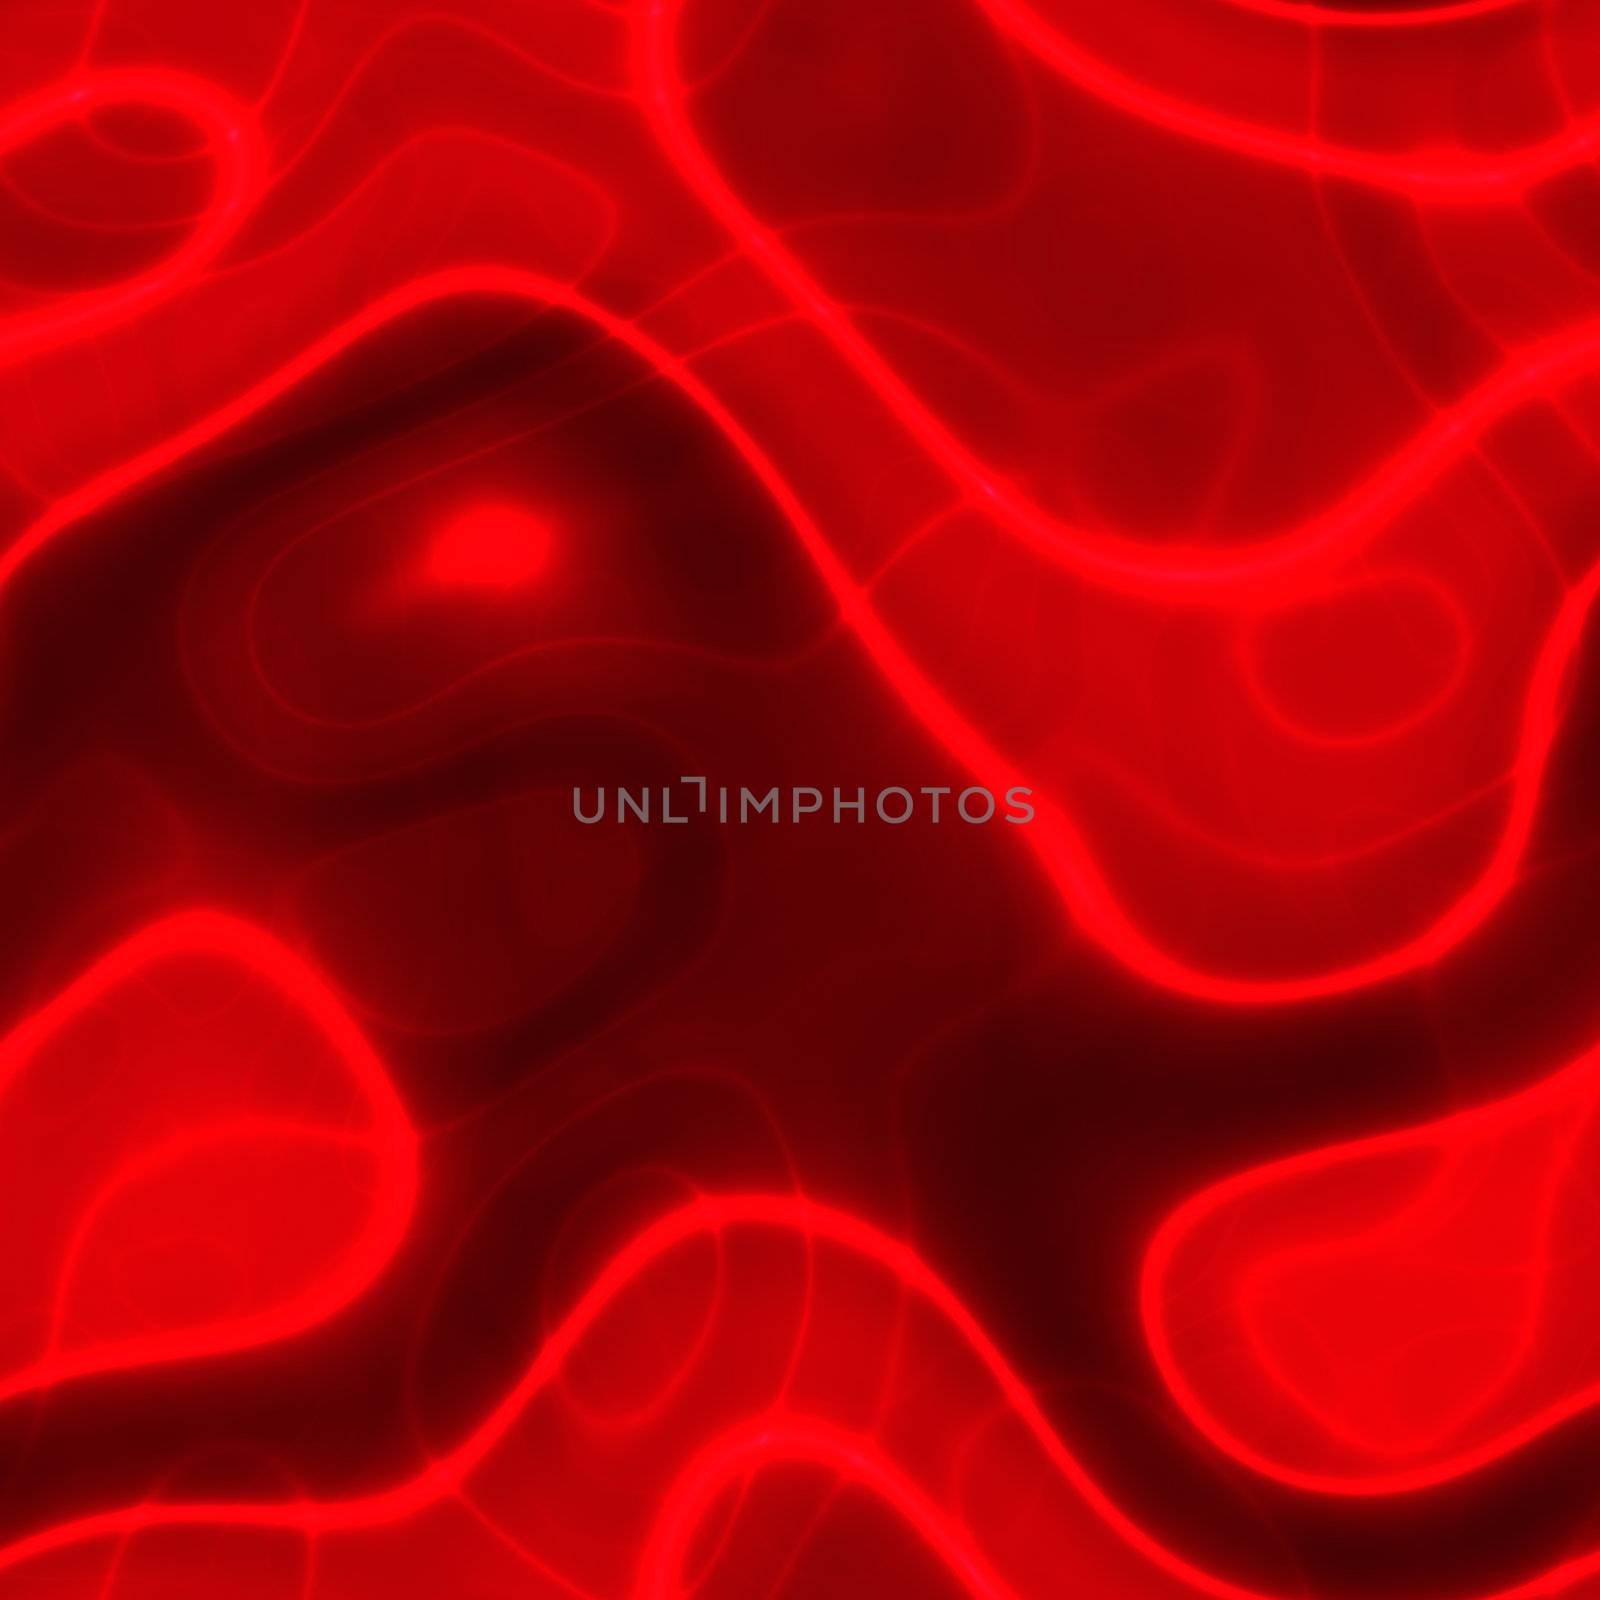 abstract neon red background over black, seamlessly tillable as a pattern

